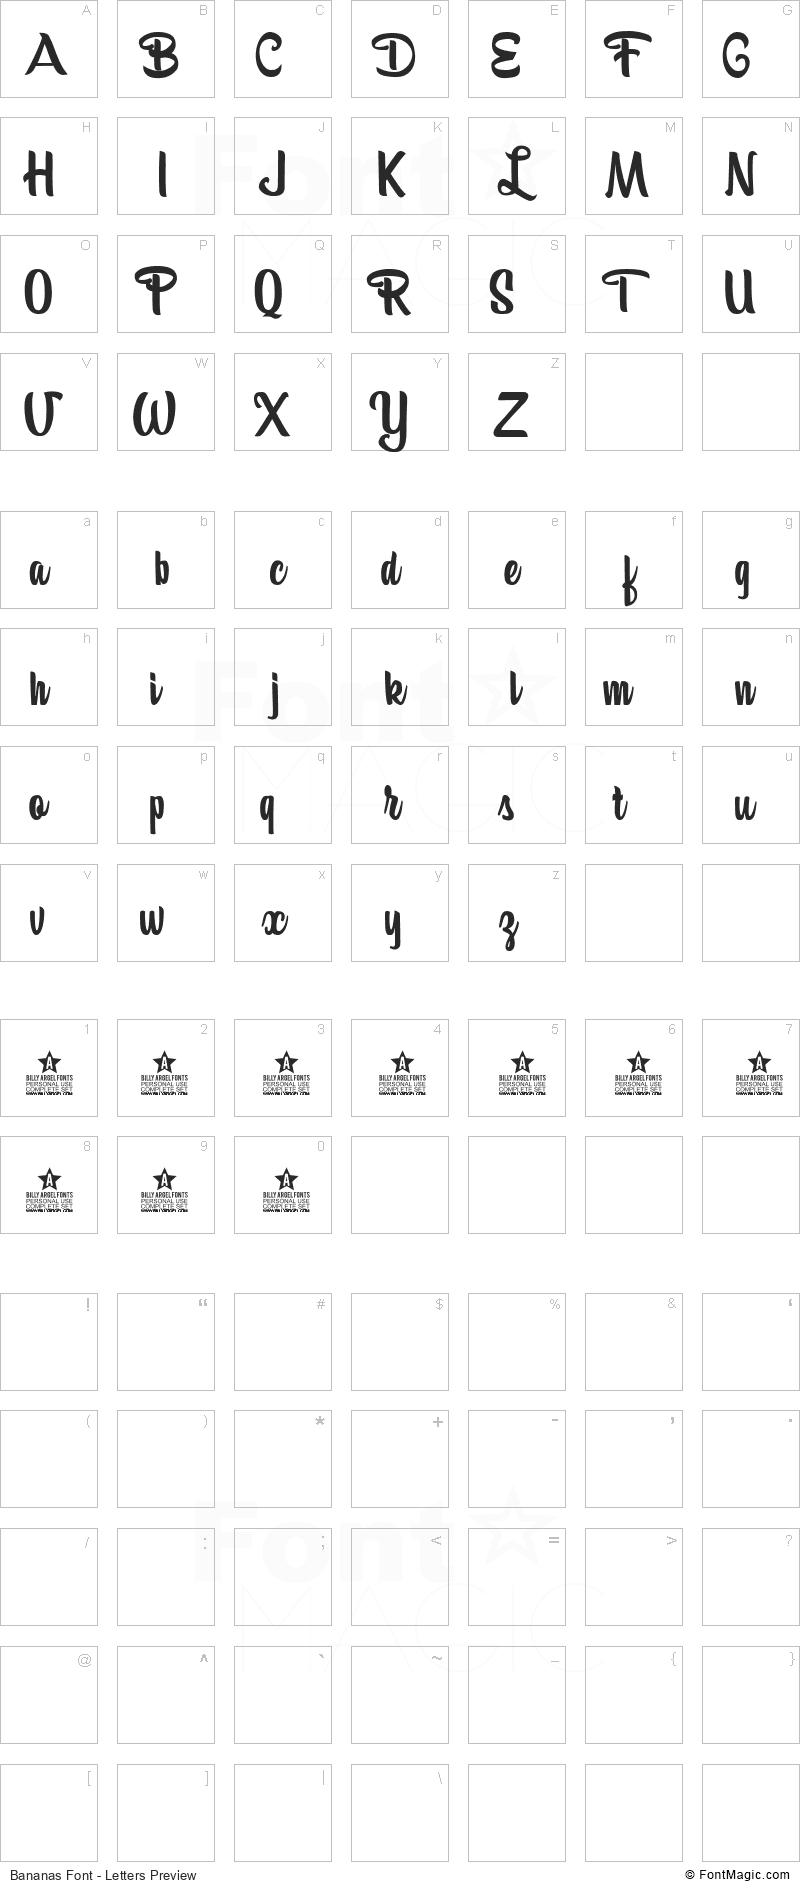 Bananas Font - All Latters Preview Chart